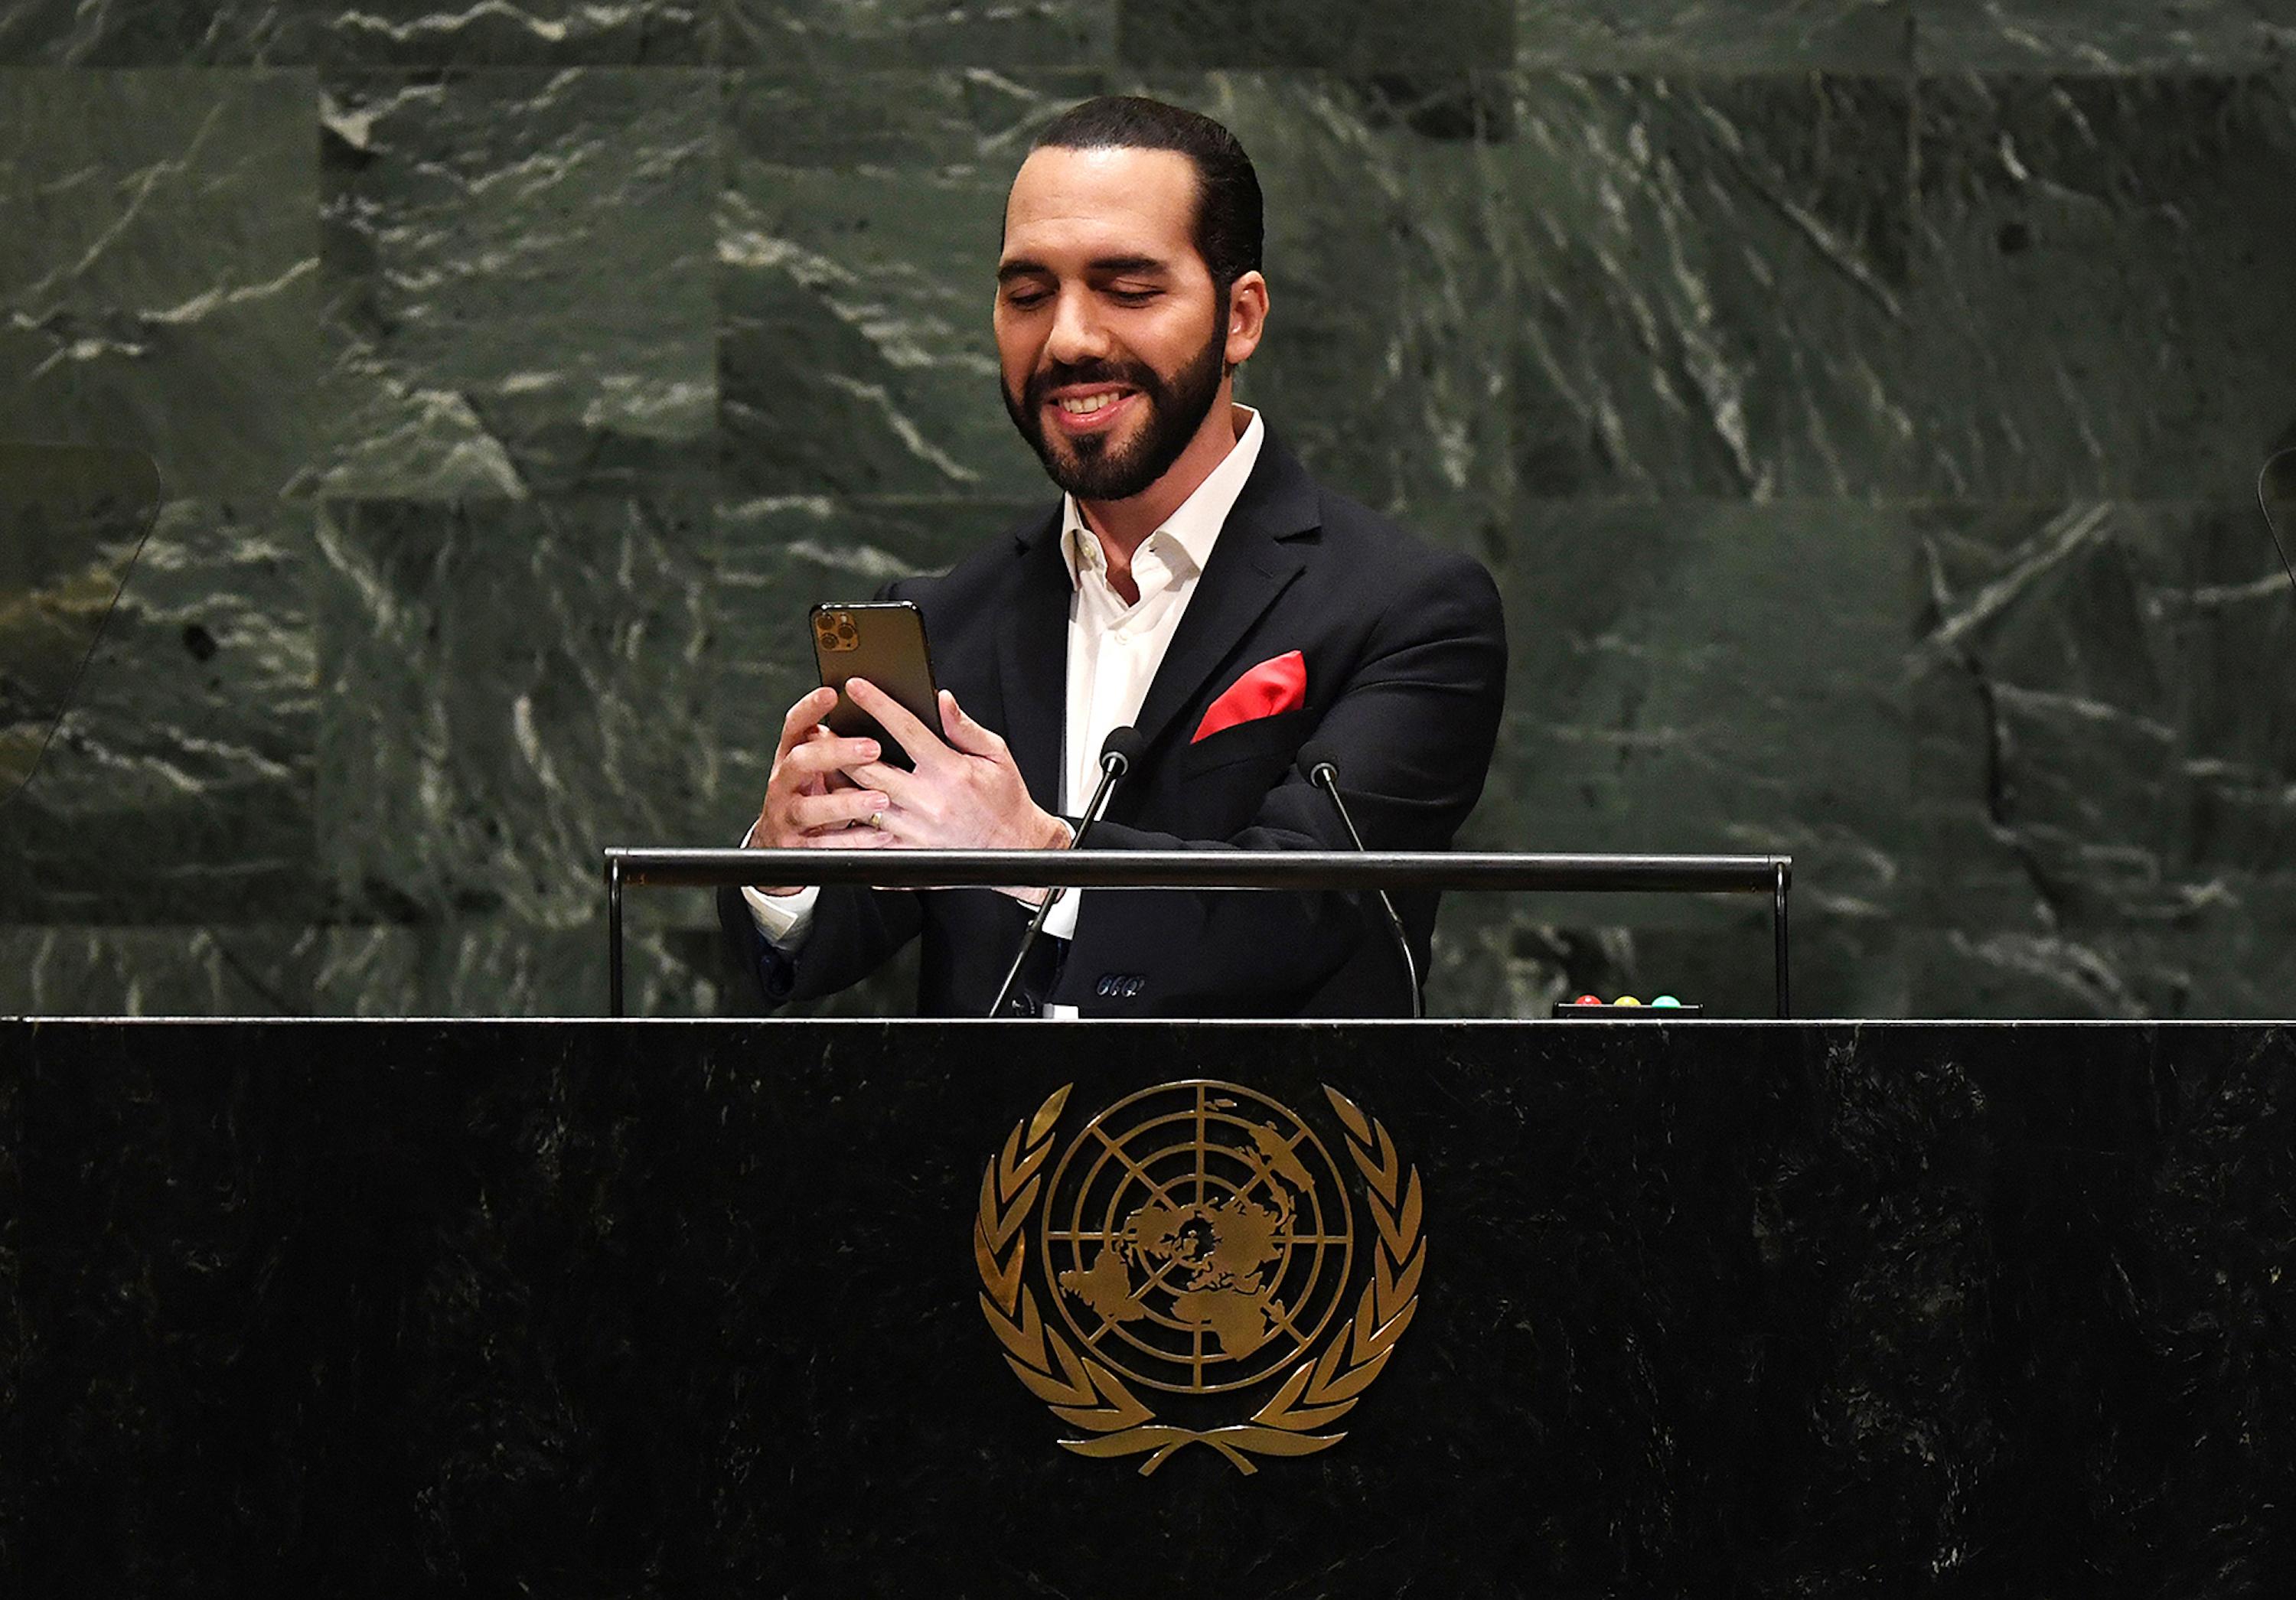 In his first speech before the international community during the 74th session of the U.N. General Assembly, Nayib Bukele called the format of the summit 